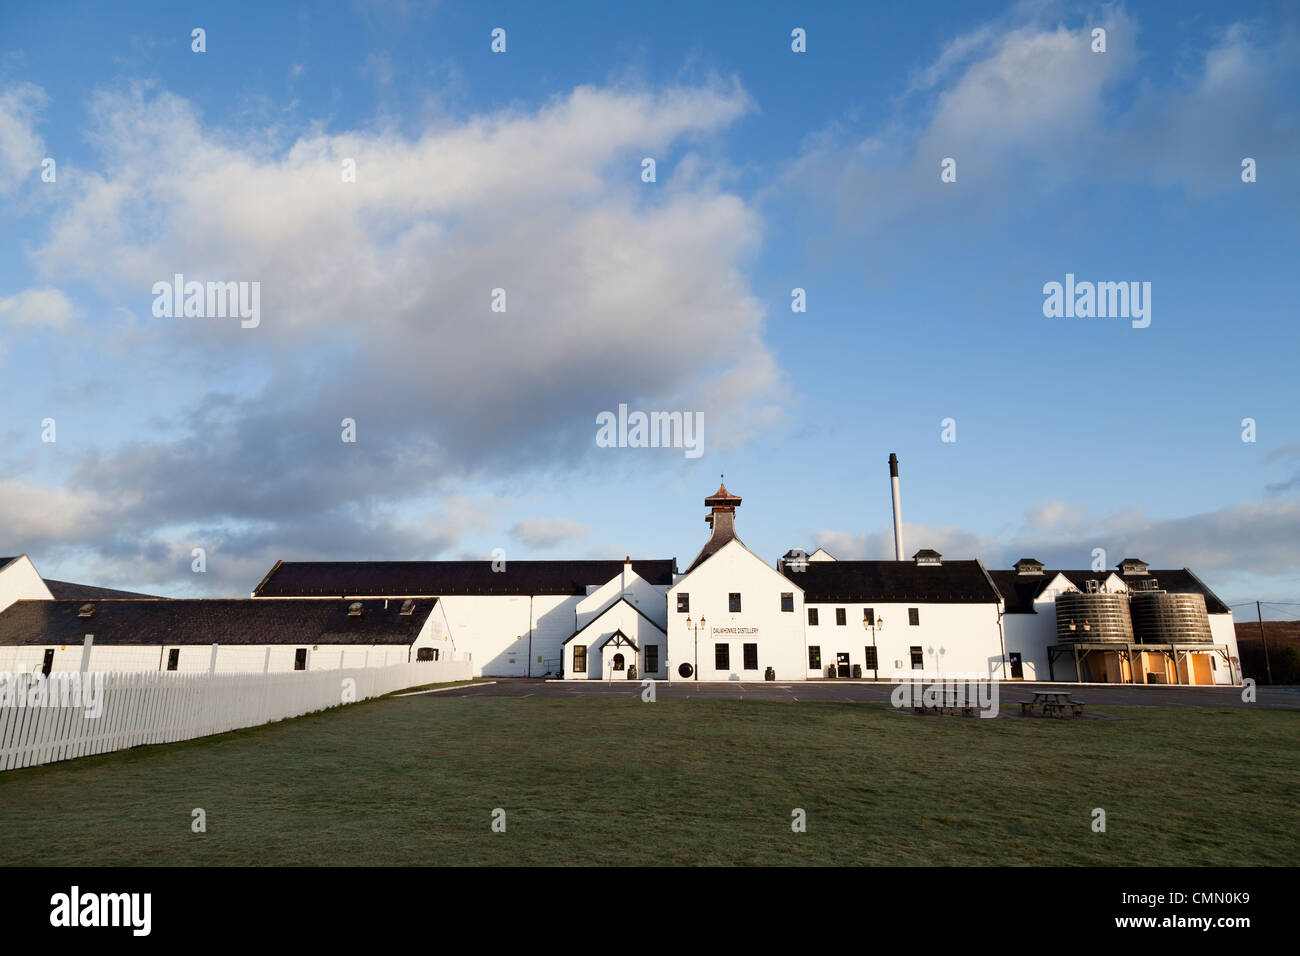 The distillery at Dalwhinnie in the Scottish highlands. Stock Photo